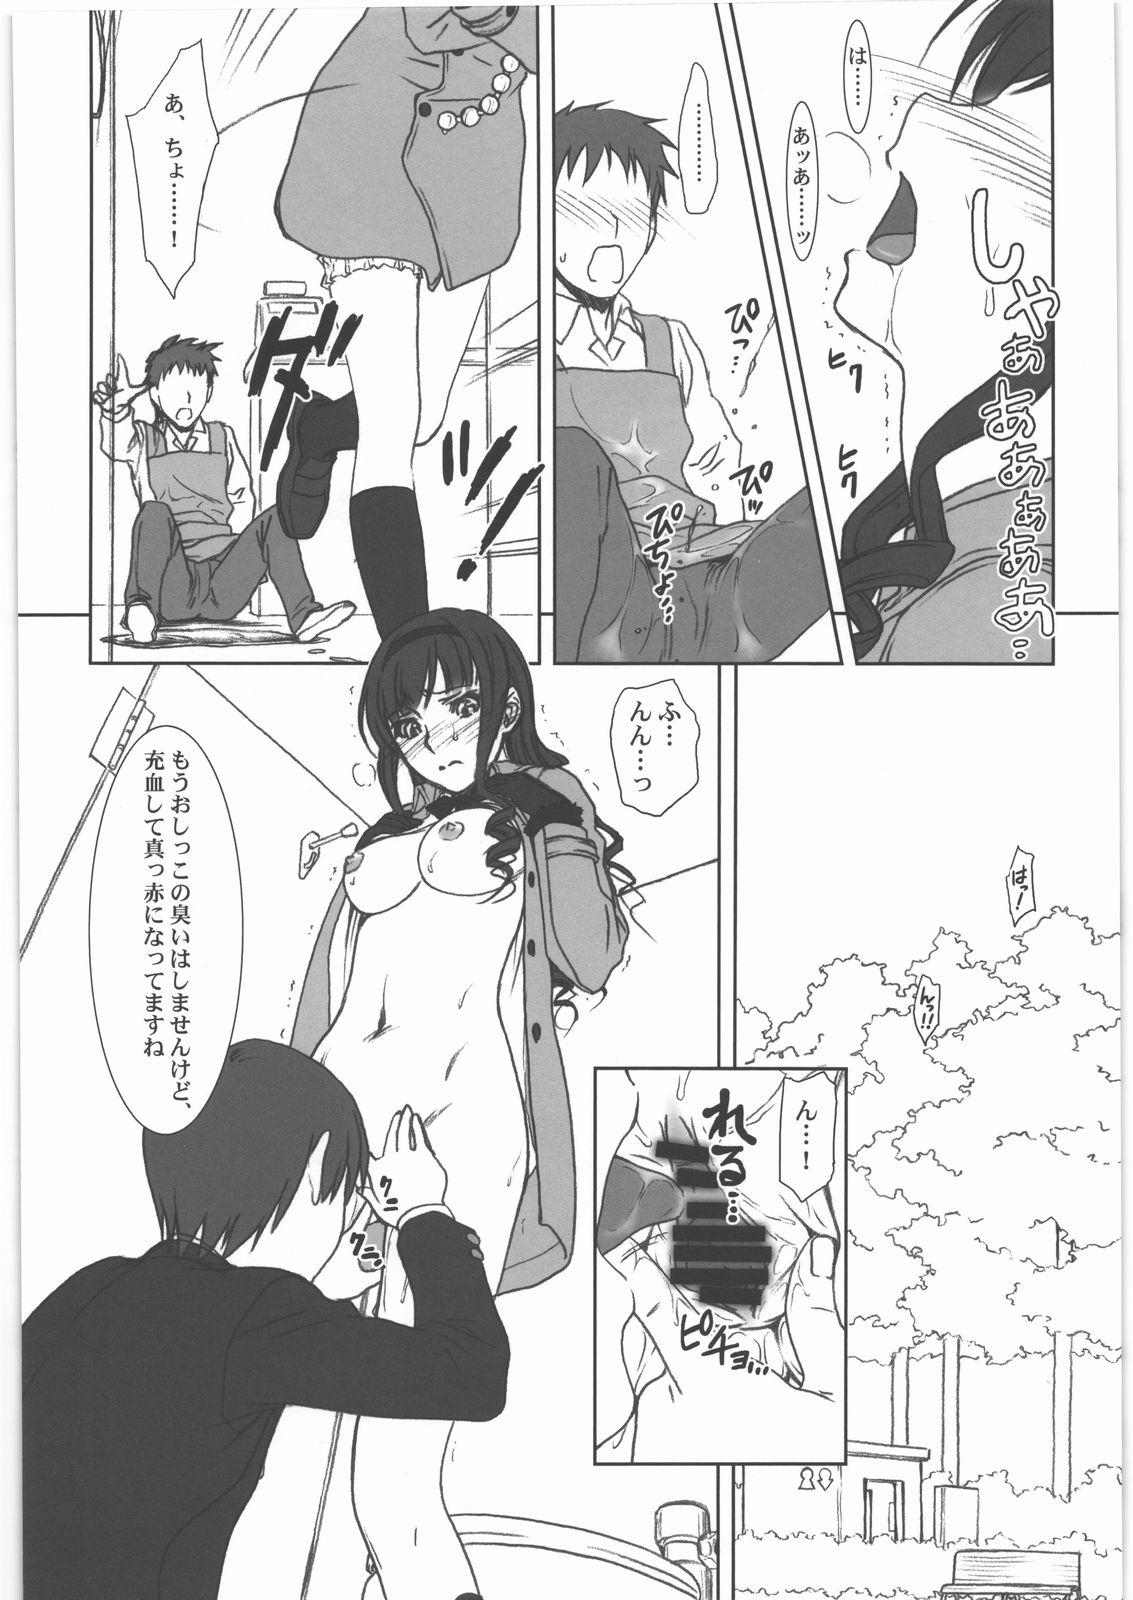 (C79) [MEKONGDELTA&DELTAFORCE (Zenki, Route39)] feed me wired things (Amagami) page 11 full